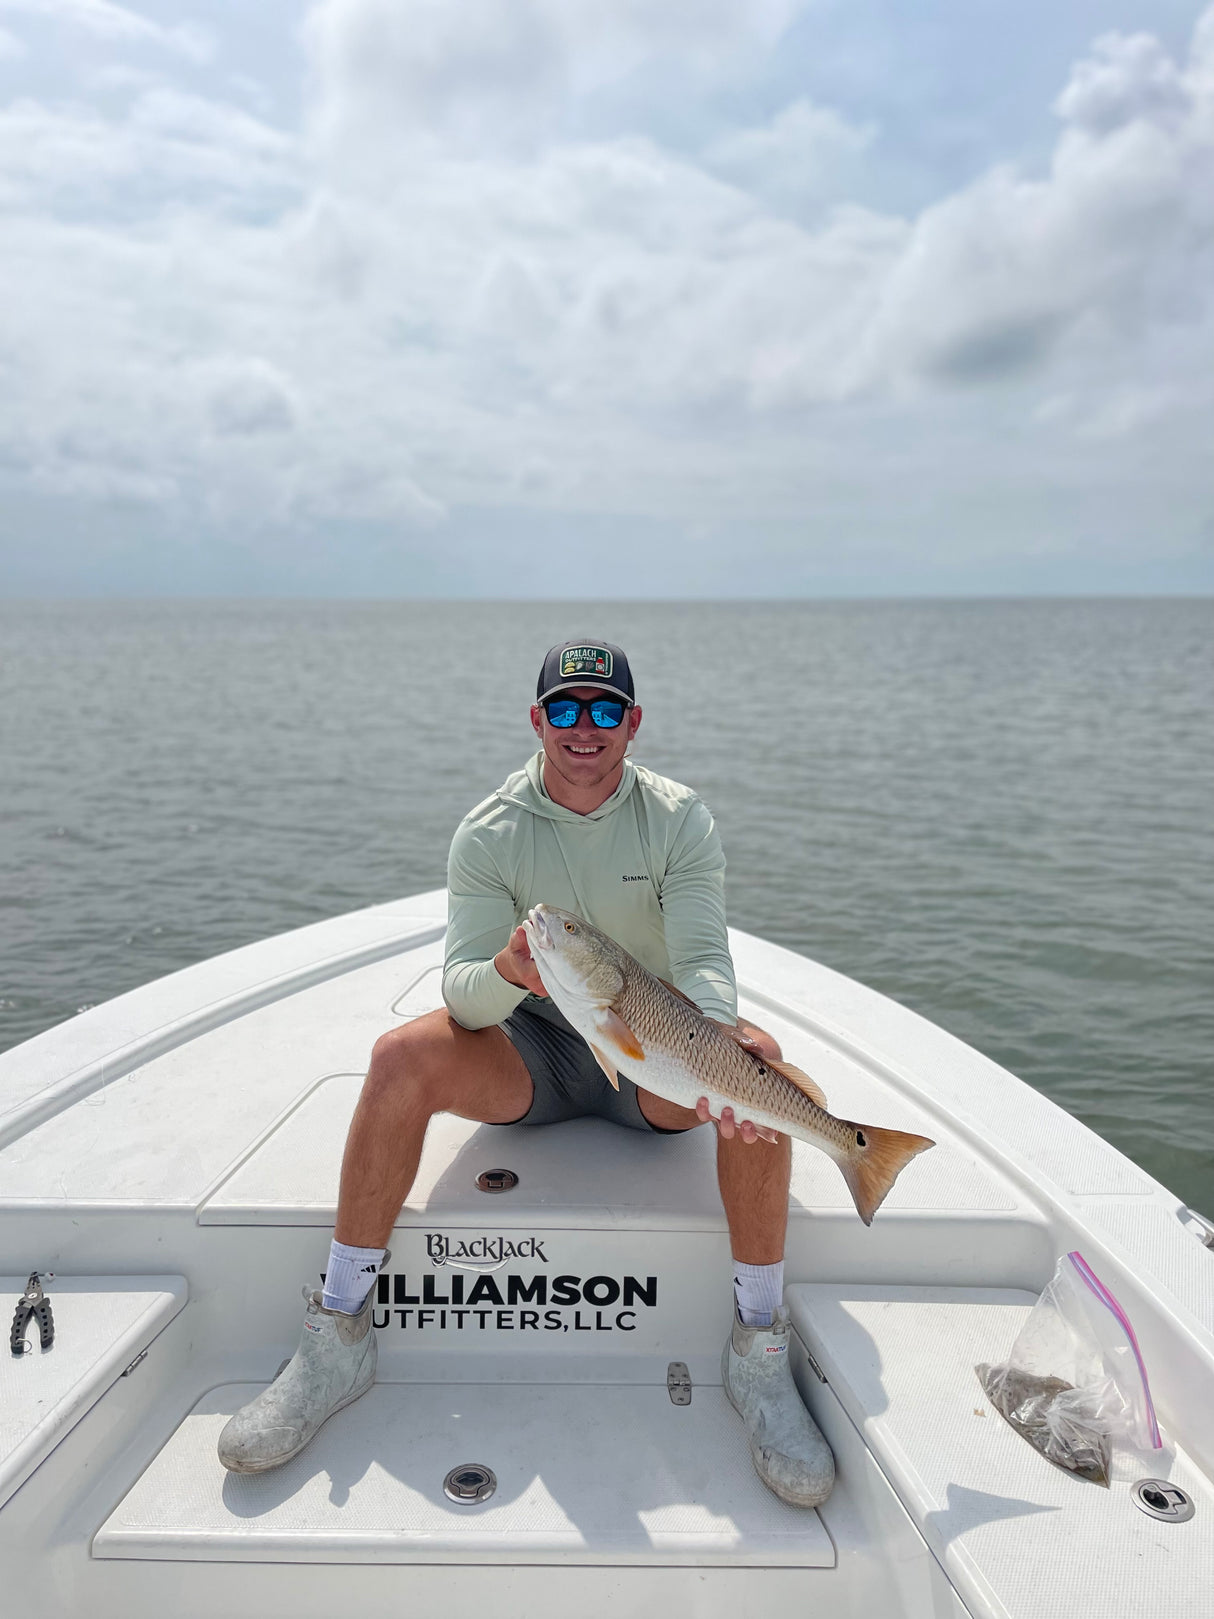 North Florida Inshore Fishing: 4 Hr Trip $550 [30% BOOKING DEPOSIT] –  Williamson Outfitters, LLC